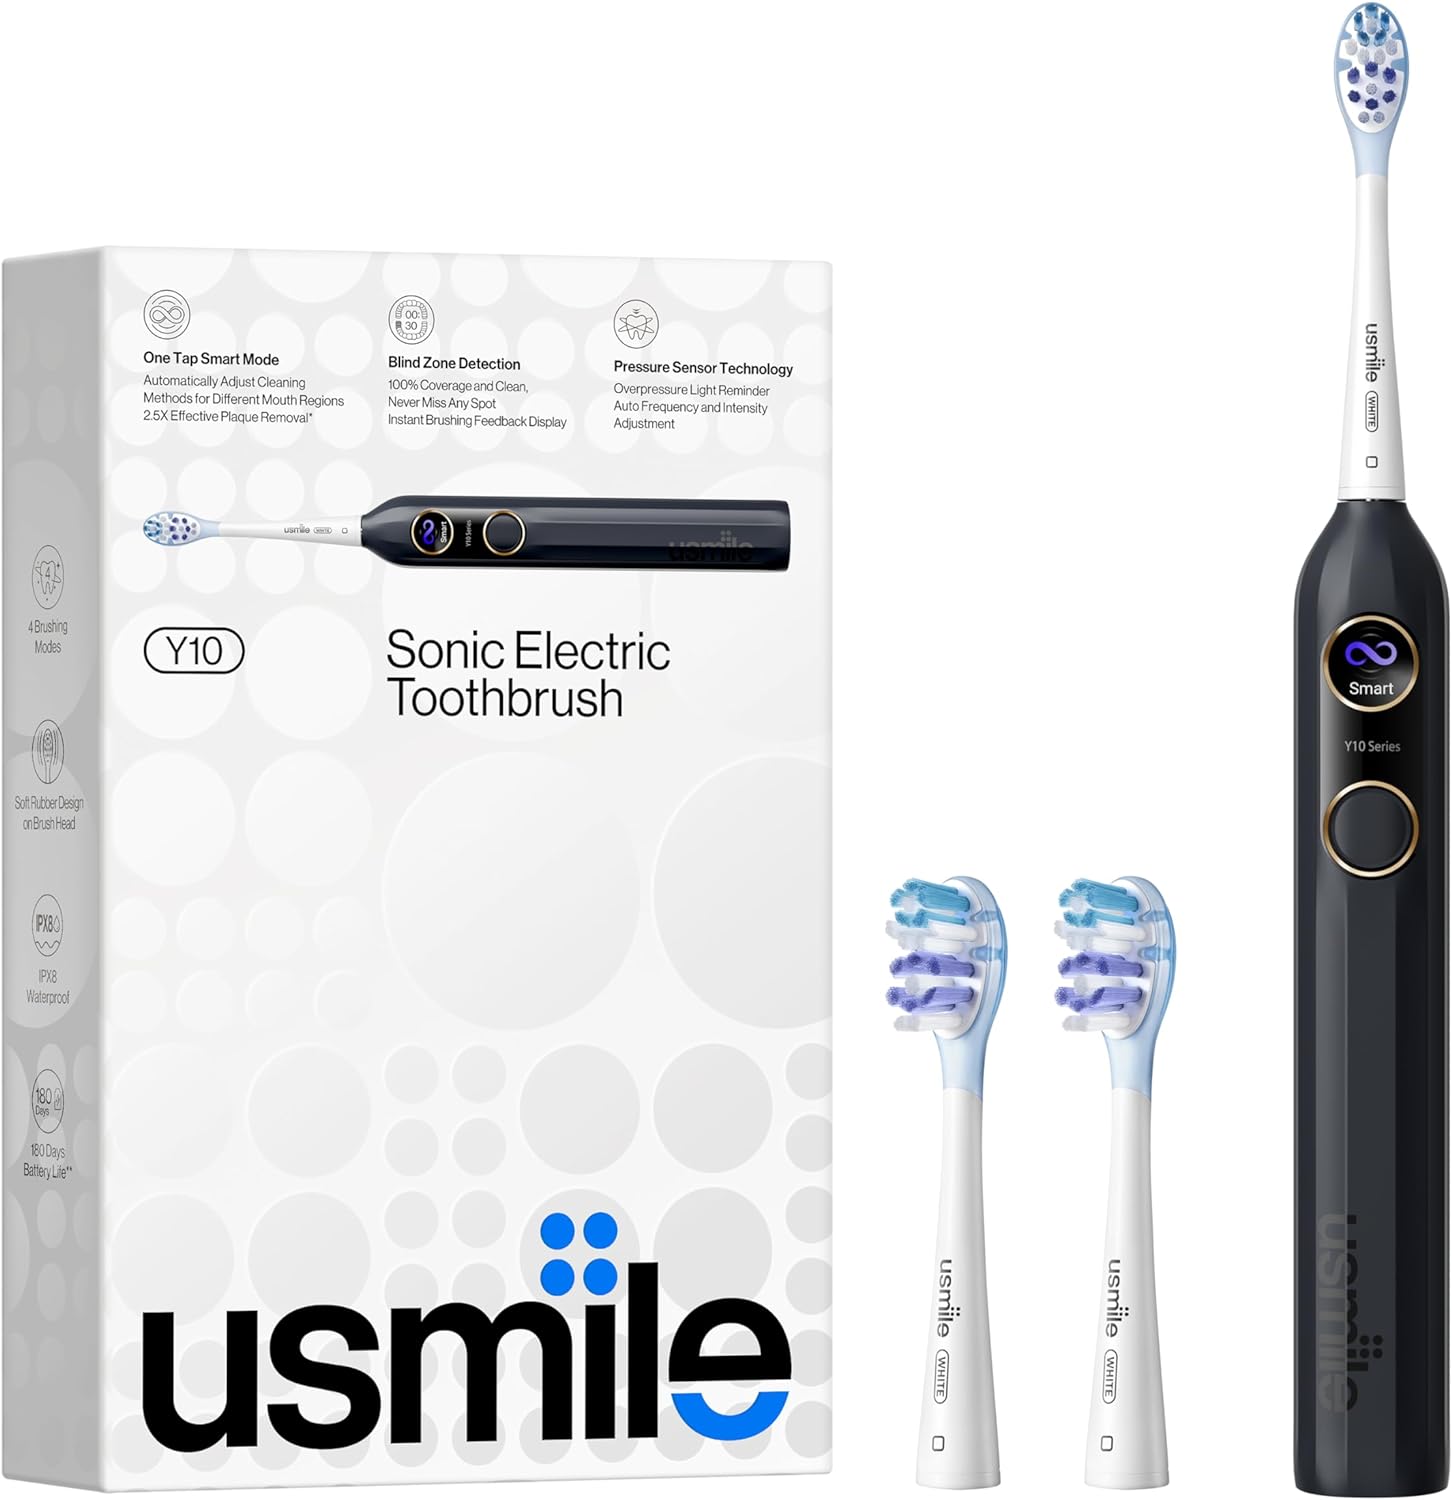 Usmile Y10 Sonic Electric Toothbrush